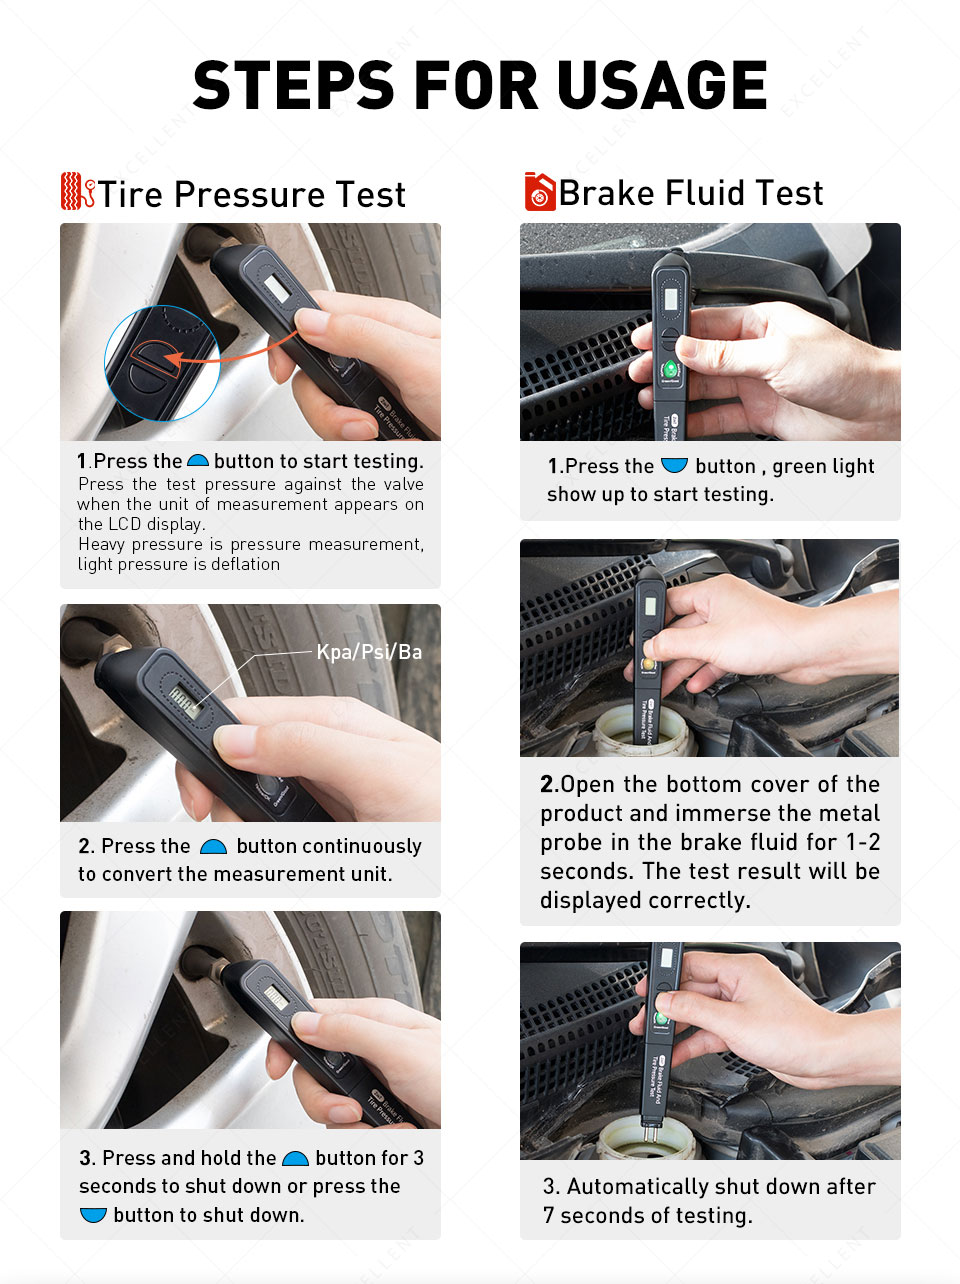 How to use Brake Fluid Tester And Tire Pressure Test 2 in 1